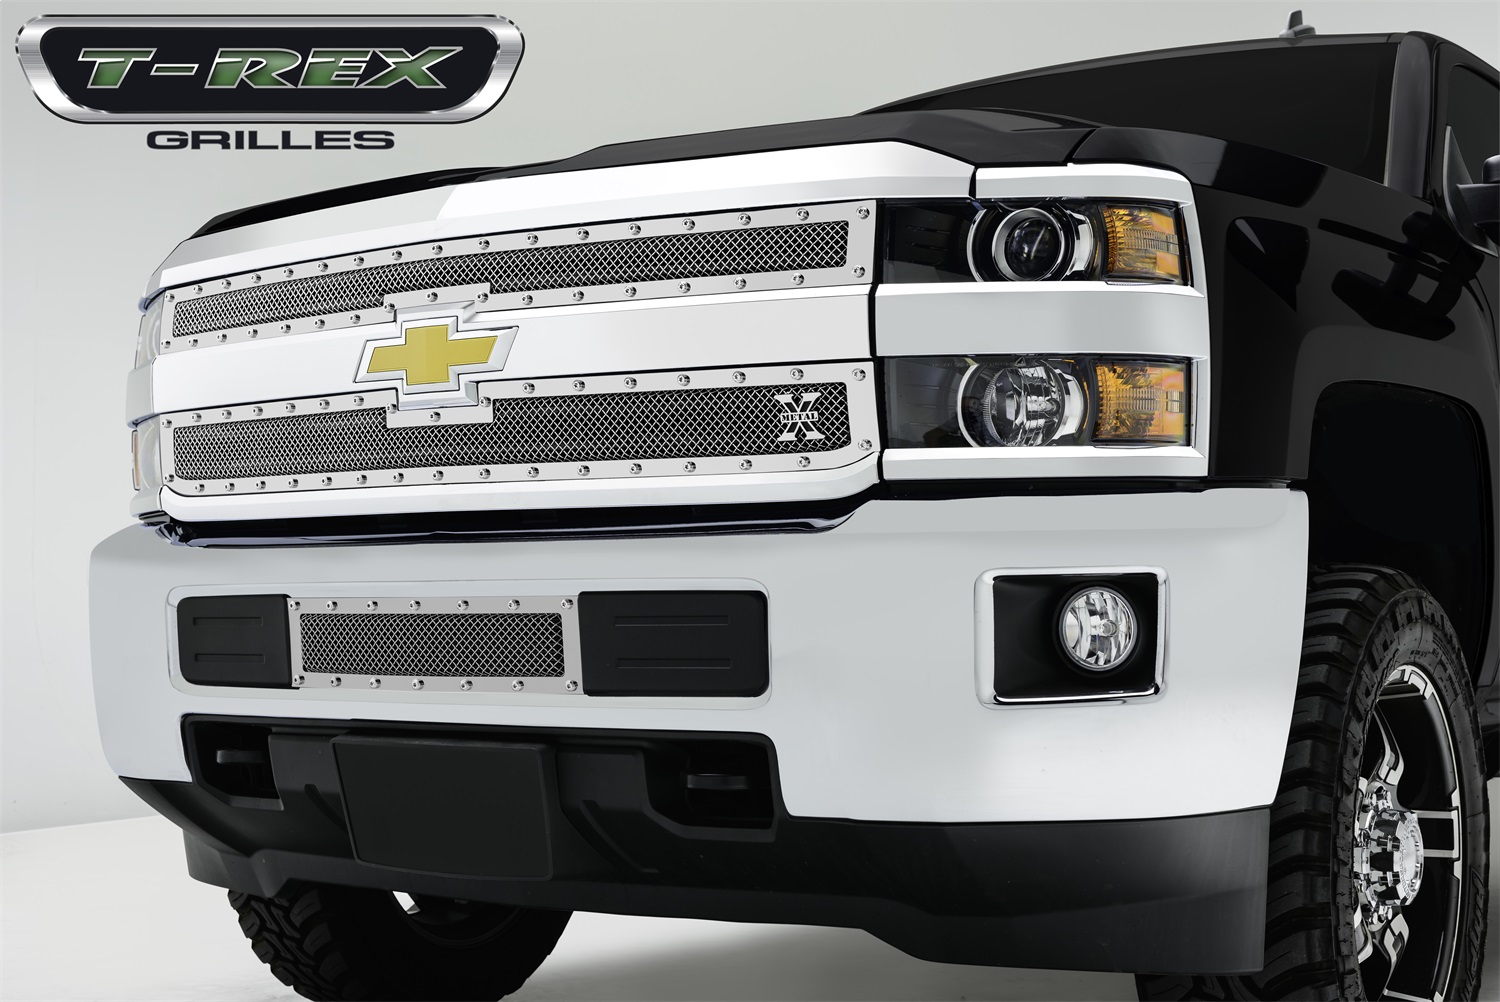 T-Rex Grilles T-Rex Grilles 6711220 X-Metal Series; Studded Mesh Grille Overlay